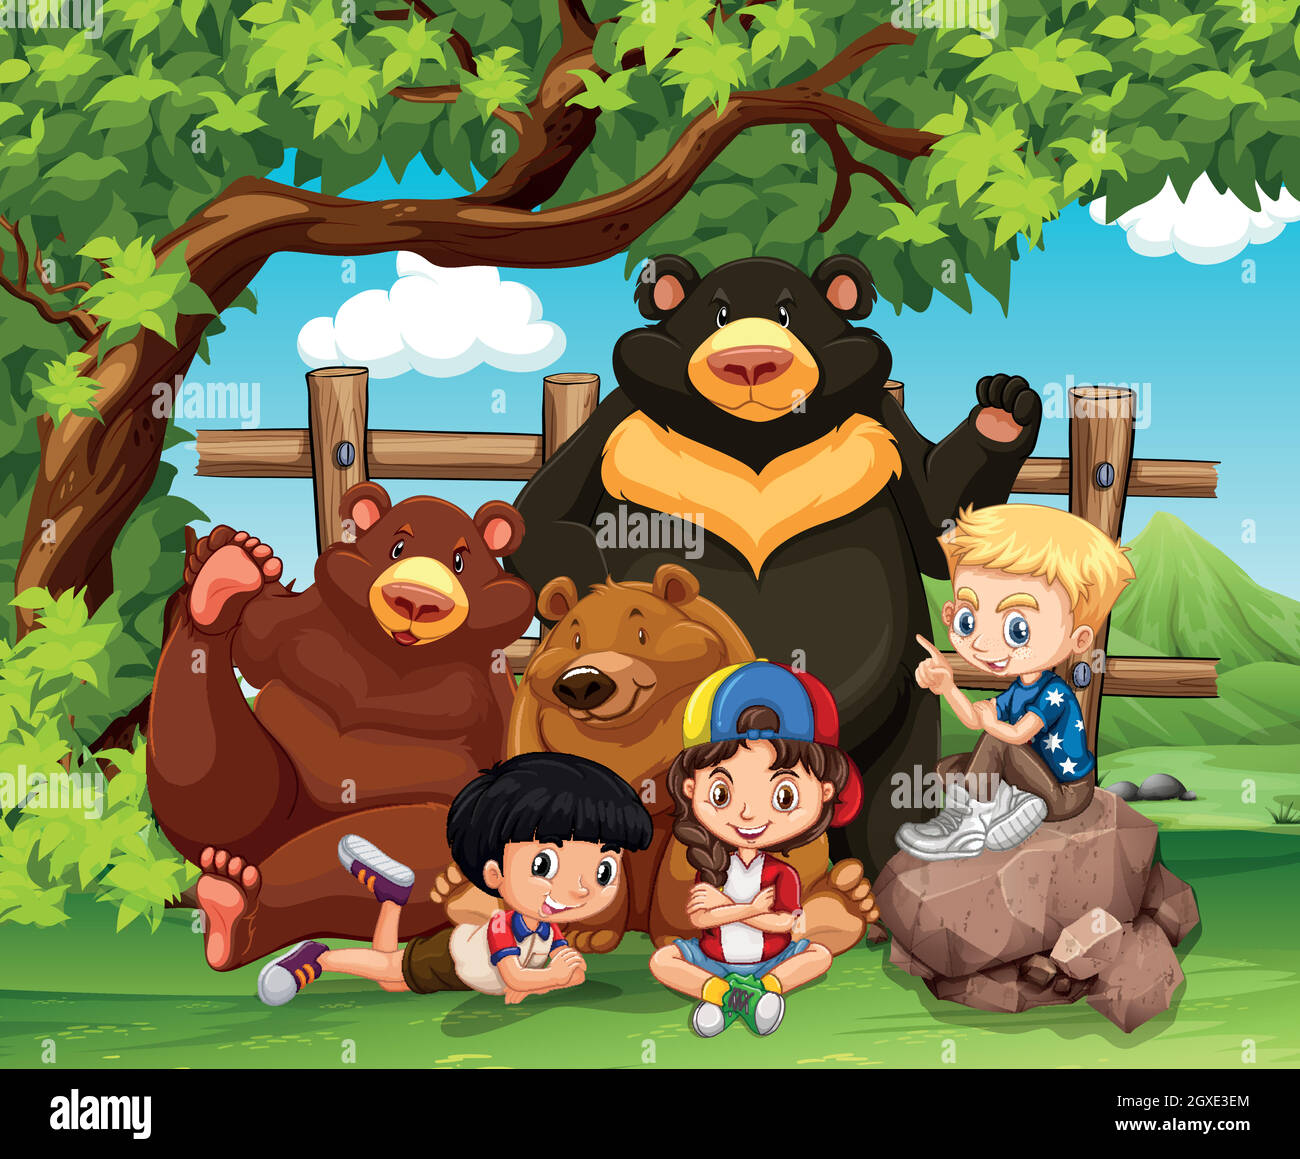 Children and wild bears together Stock Vector